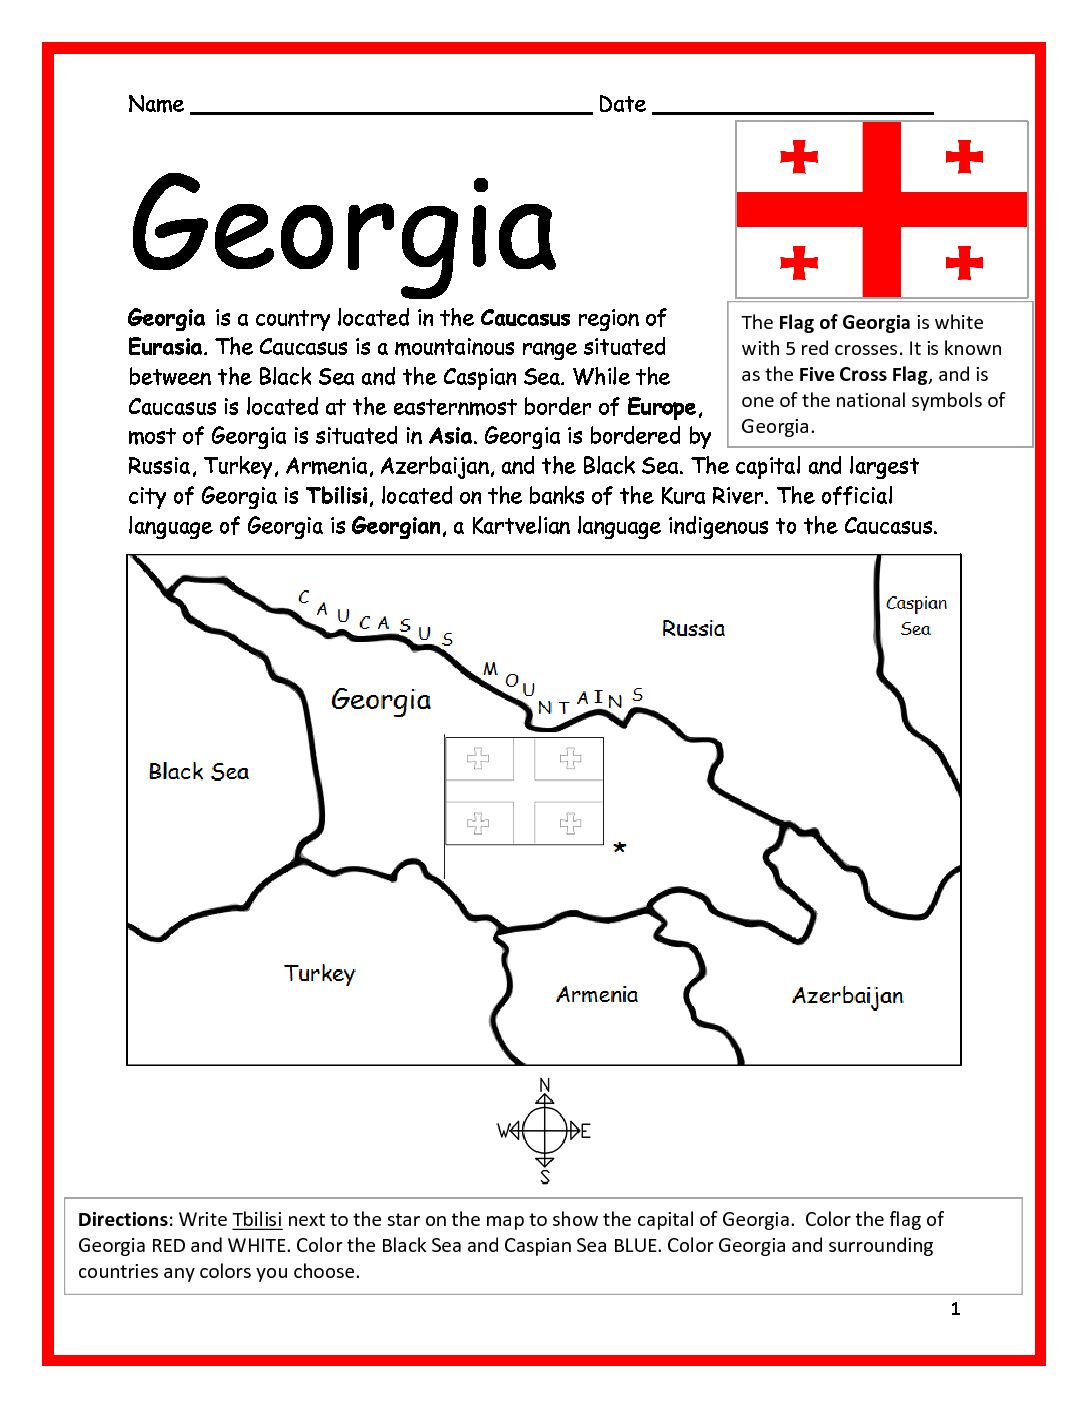 Georgia Country Printable Worksheet with Map and Flag